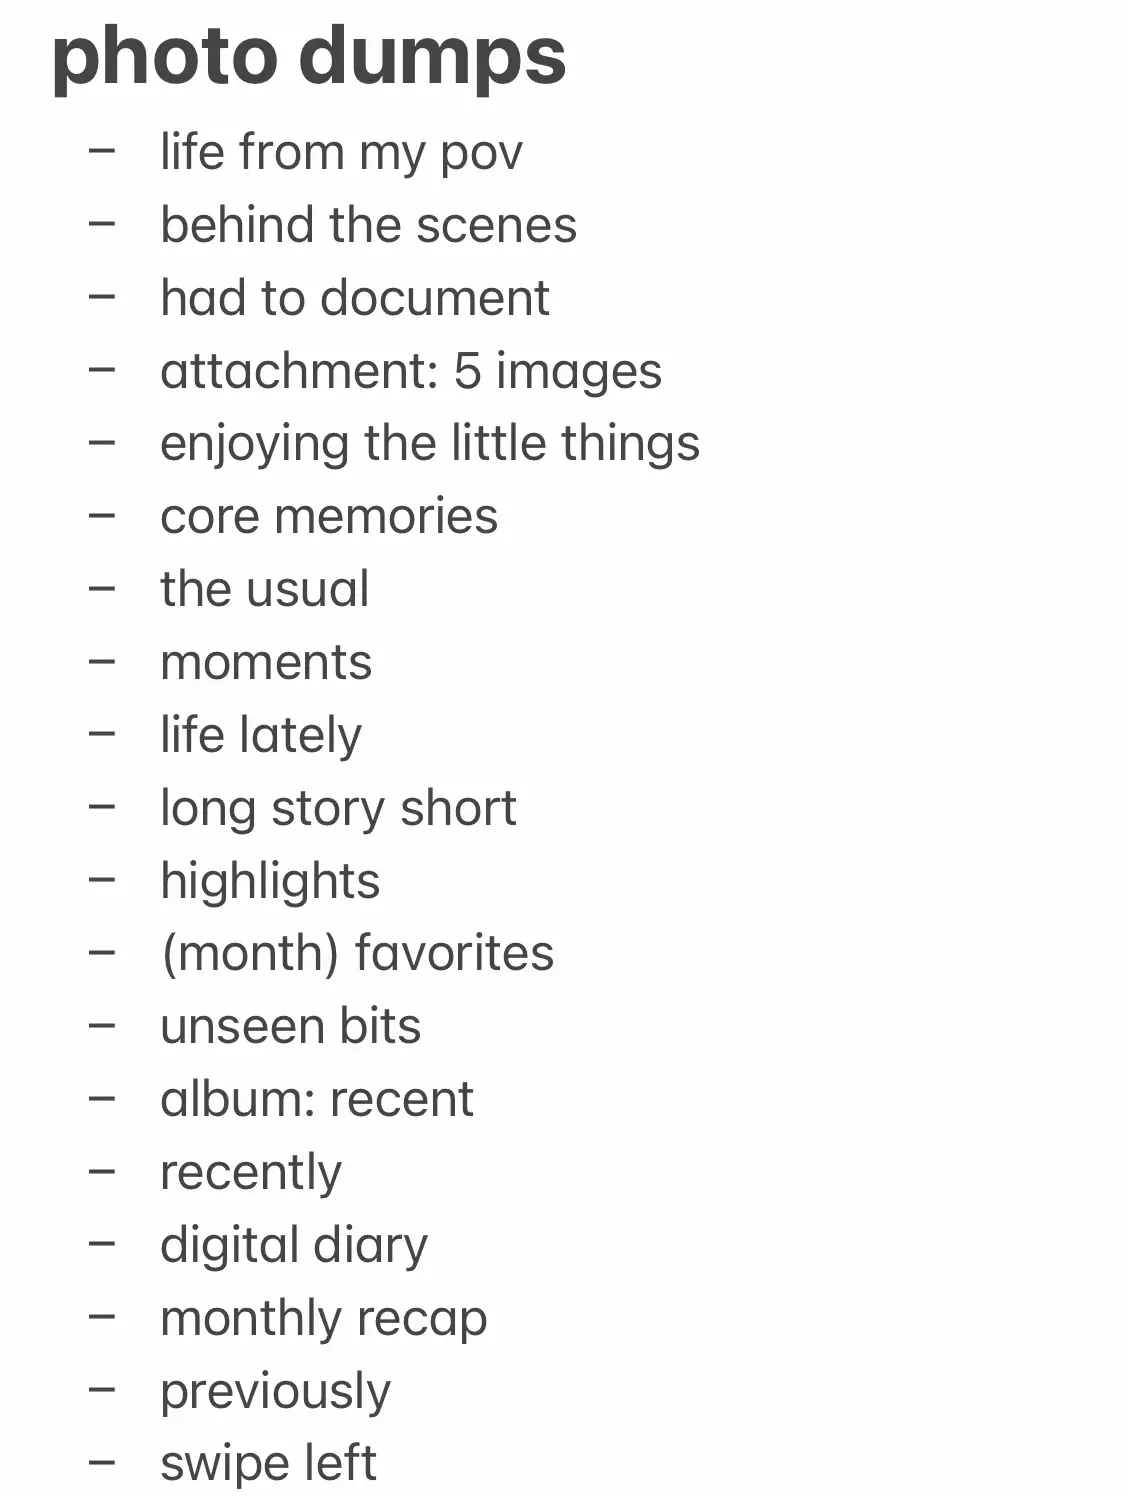  A list of things to look at